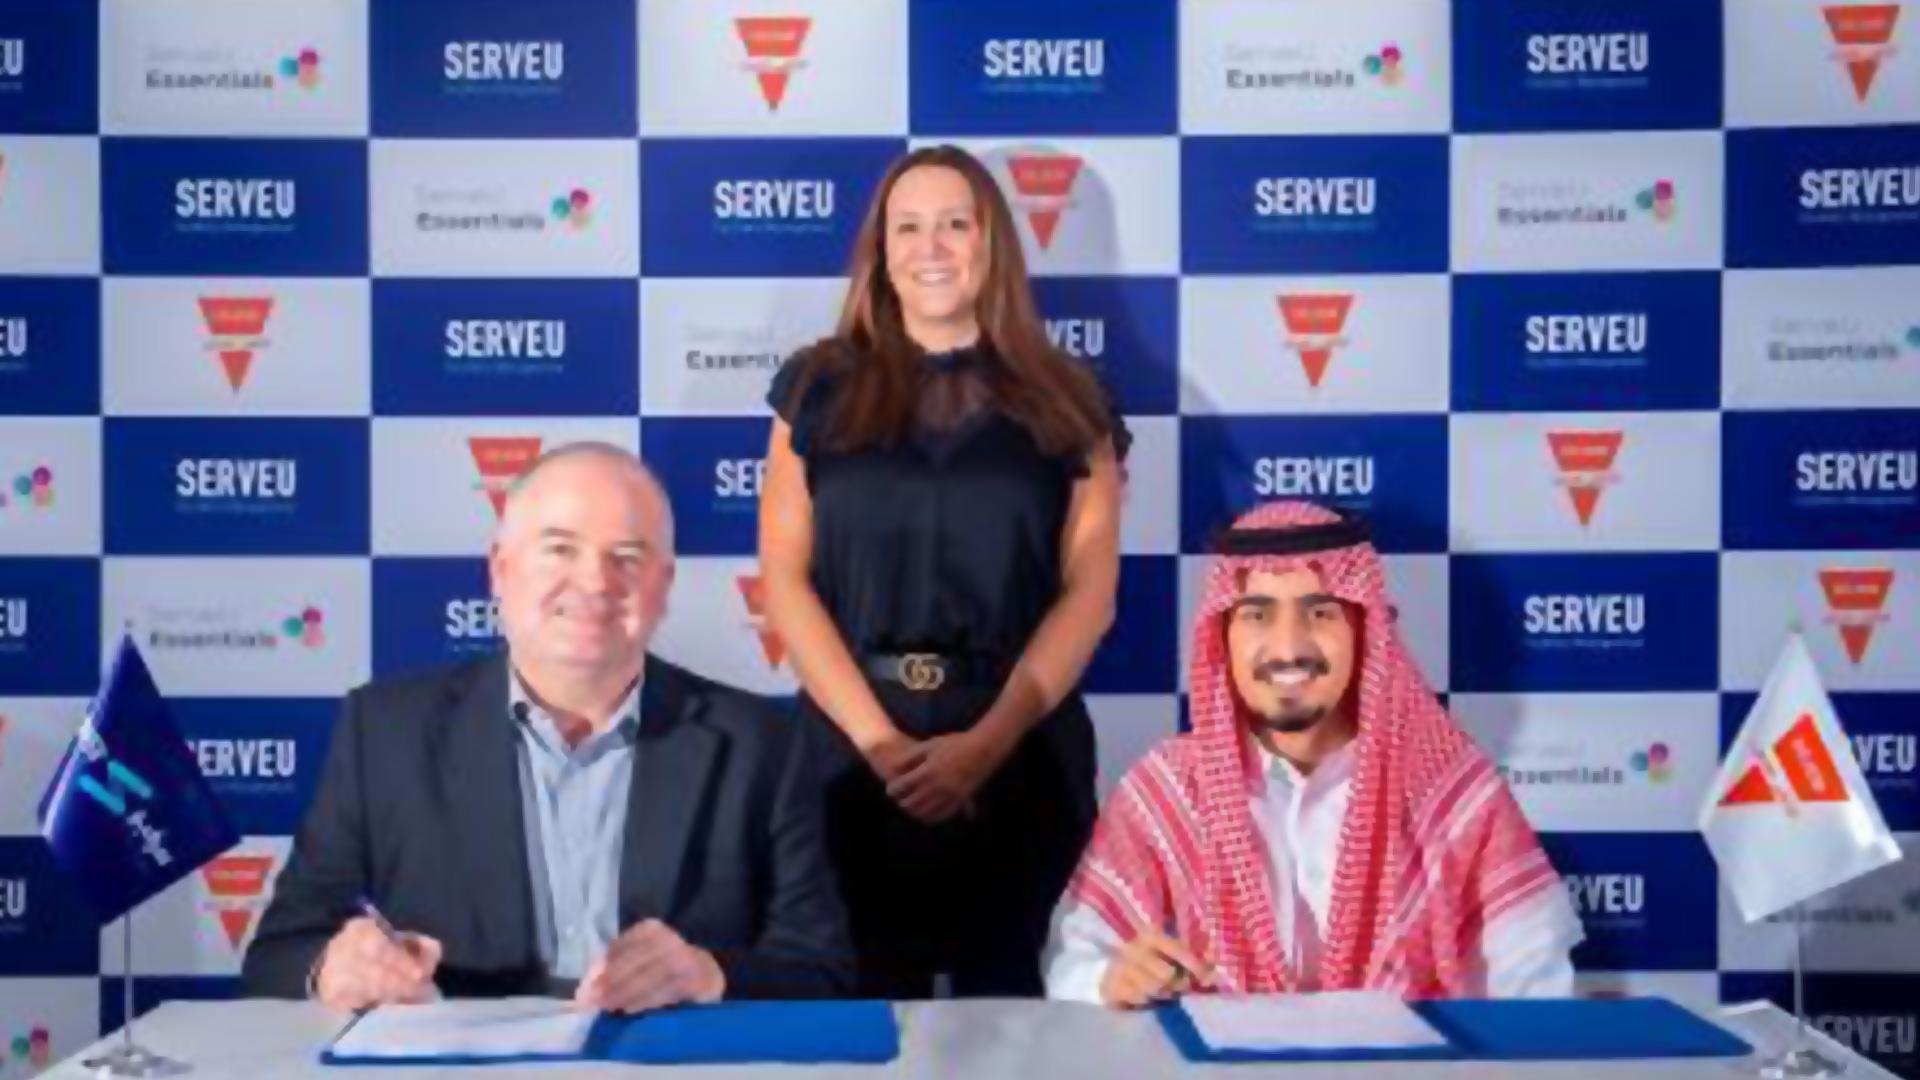 ServeU essentials to provide facilities management services to Ayedh Hussein Bin Dejem Real Estate Group  Image